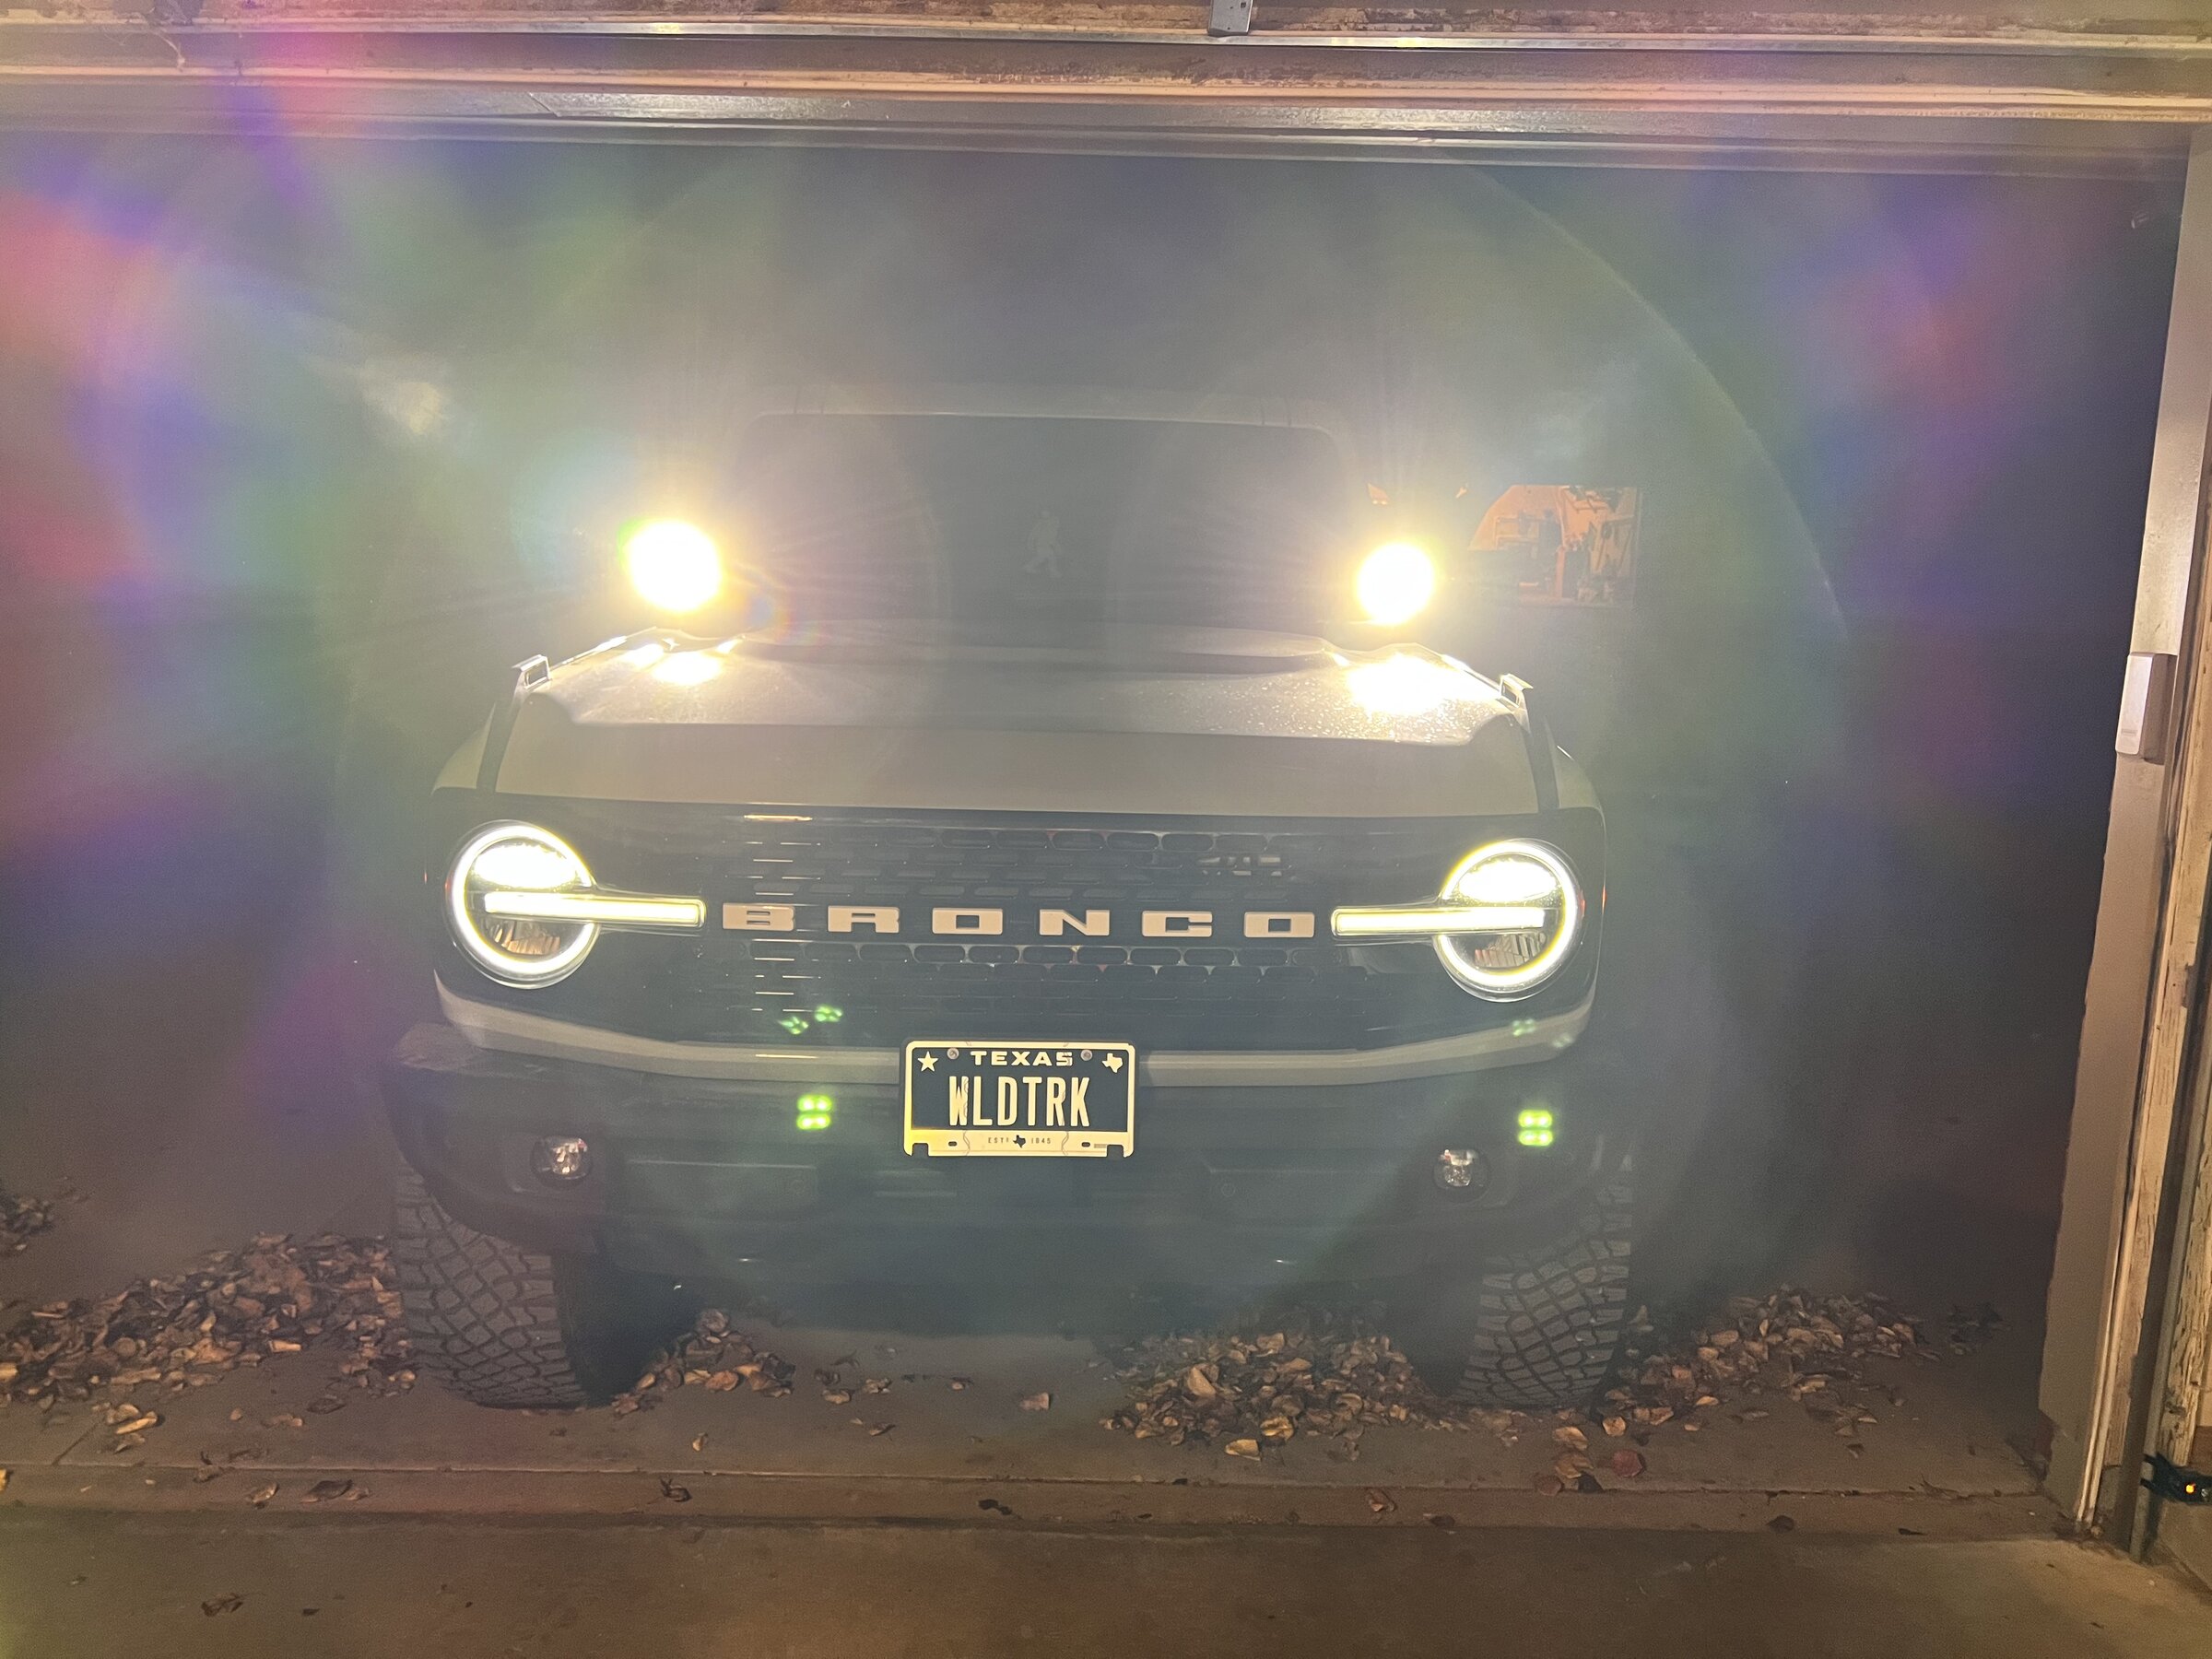 Ford Bronco What brand mirror lights did you go with? Amber or white? 9E9AF602-A0D8-4D4F-9ACB-DDD608D771DD